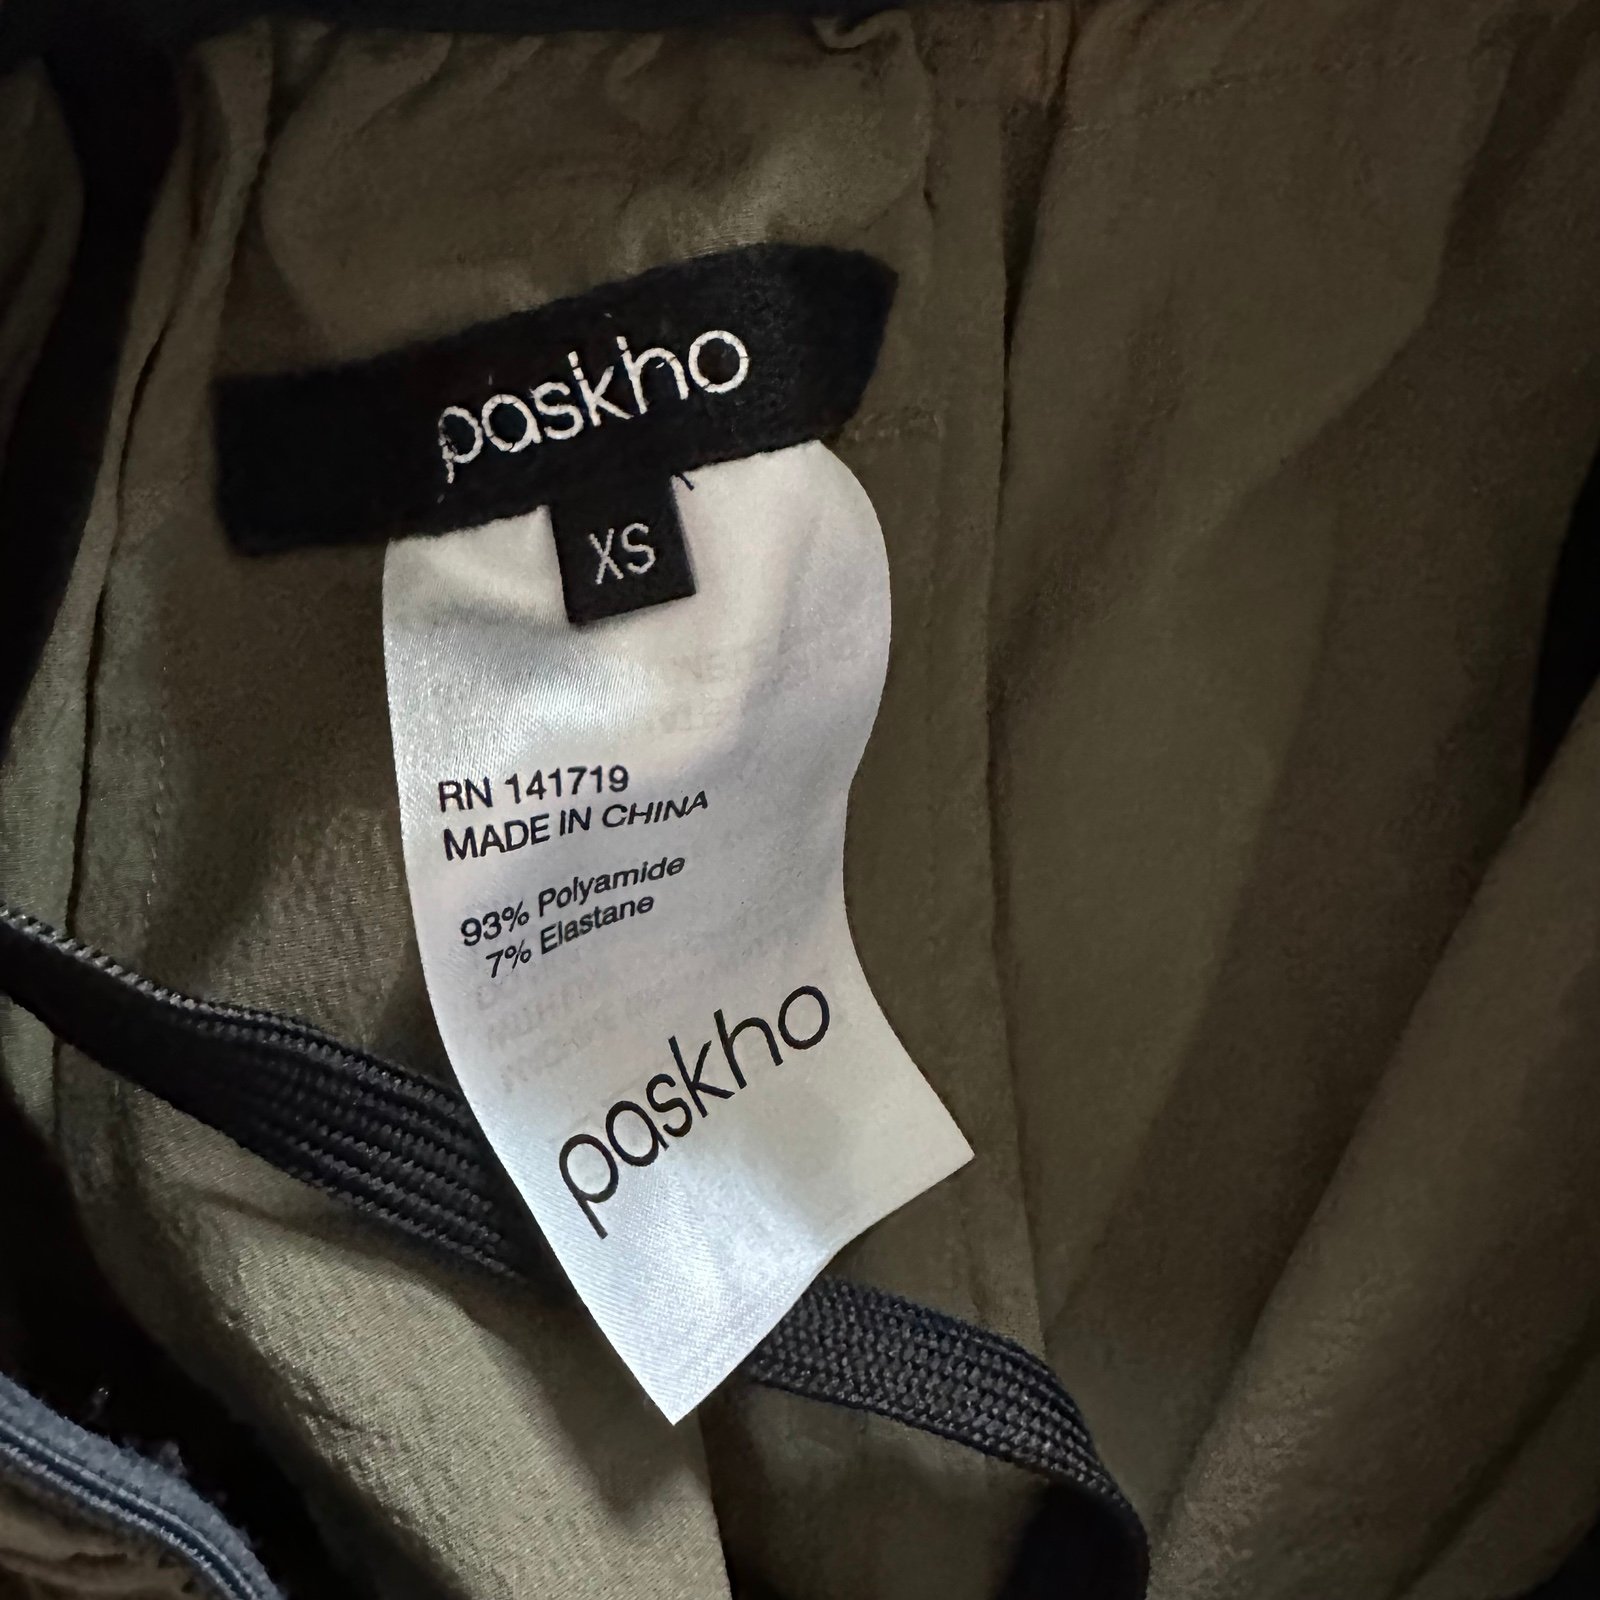 Perfect Pashko Purity Pants - Insanely Comfortable and Stylish Travel Pants in Sz XS pRbIKfiCl Counter Genuine 